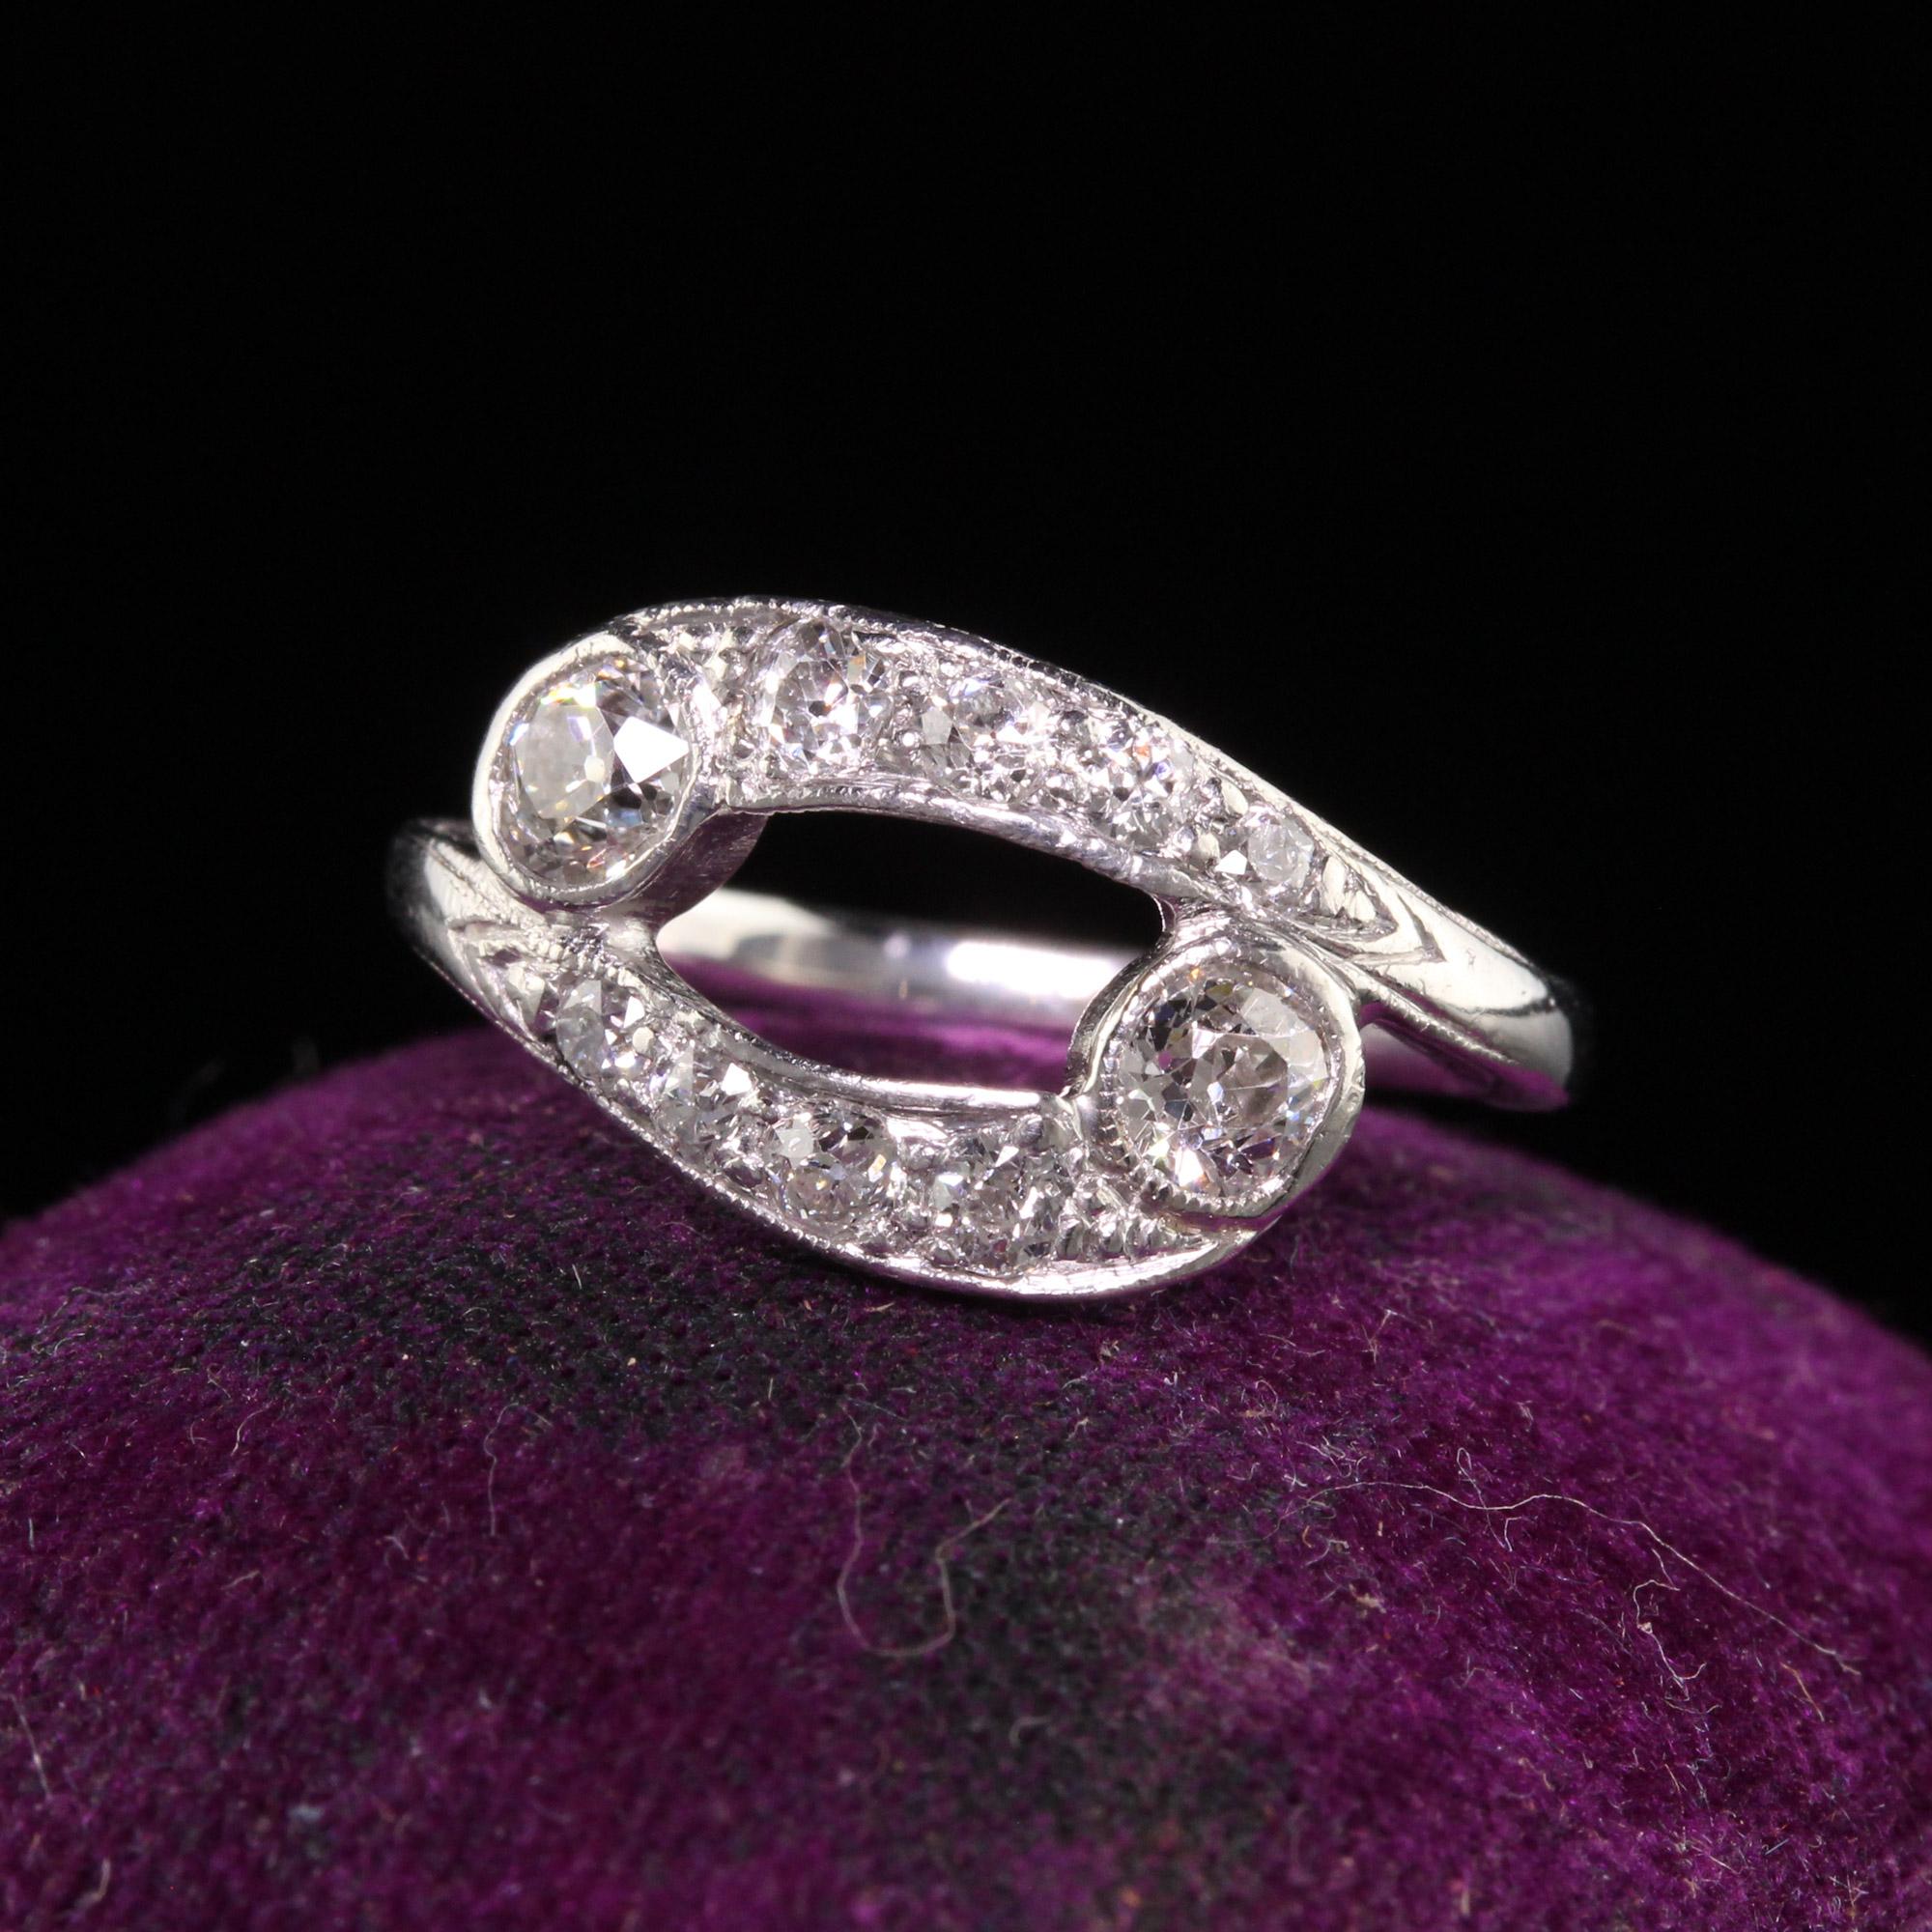 Beautiful Antique Art Deco Platinum Bypass Toi et Moi Old Euro Diamond Ring. This beautiful ring is crafted in platinum. The ring has a very interesting toi et moi / bypass design that has old european cut diamonds on it with fine engravings on the